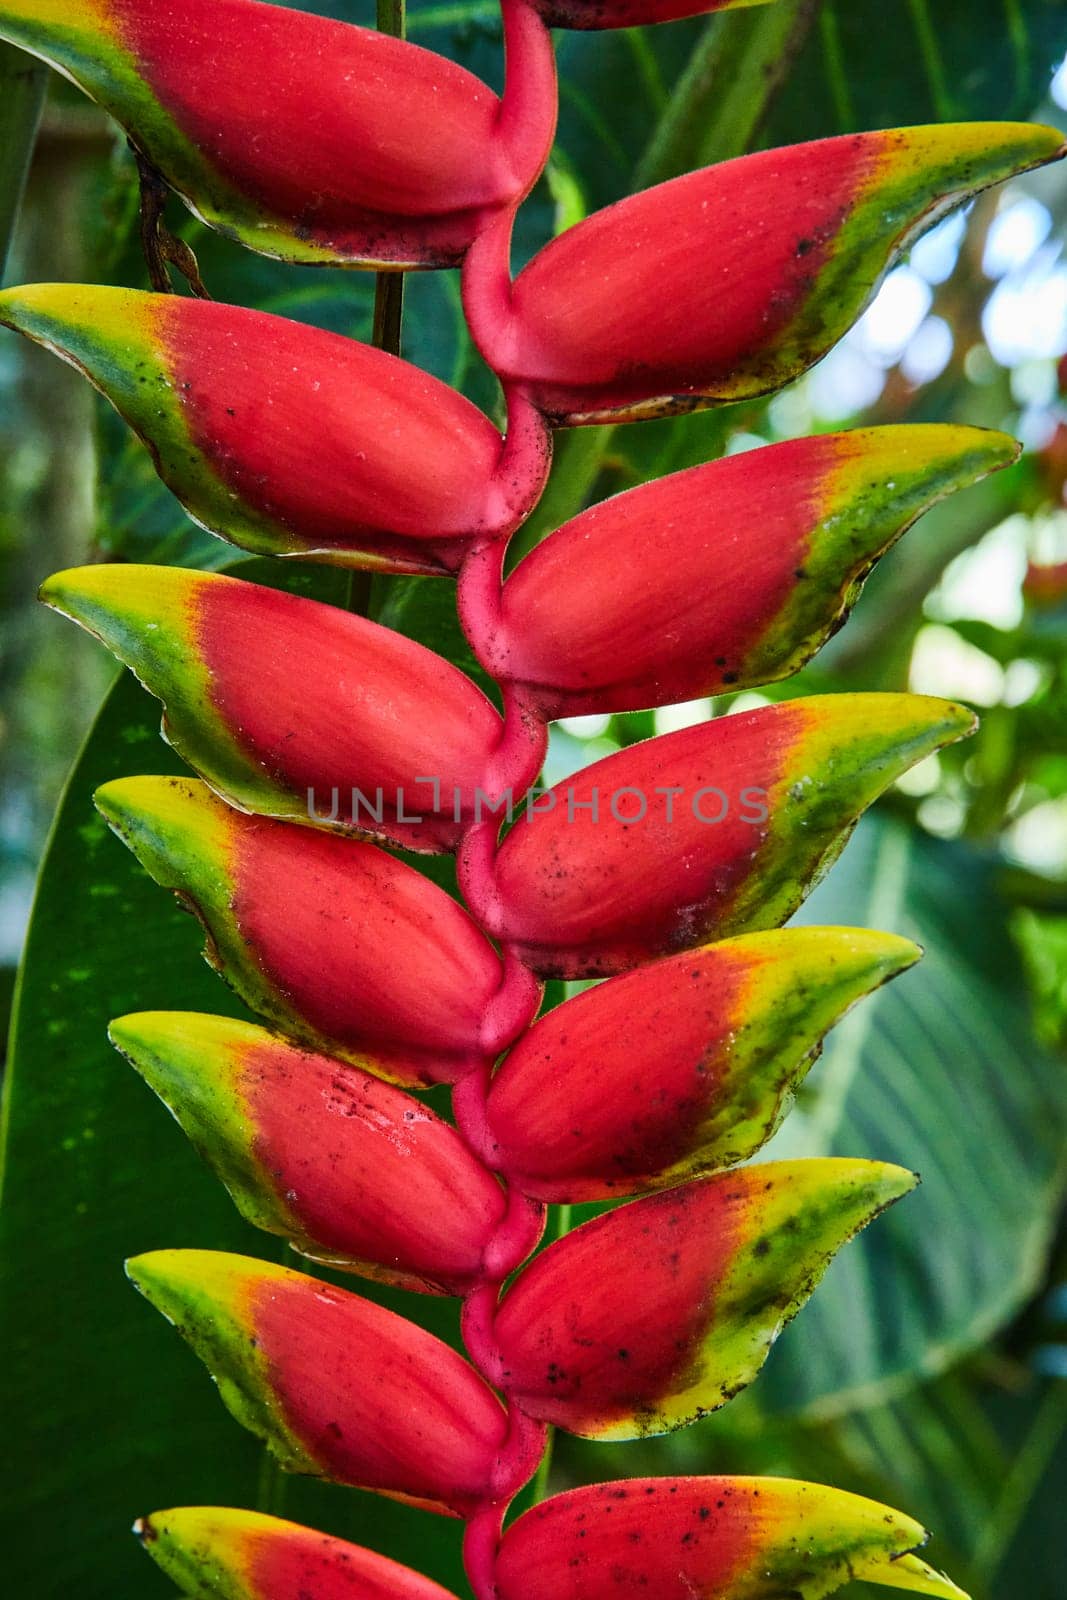 Vibrant Heliconia Flower Close-Up in Tropical Greenhouse by njproductions